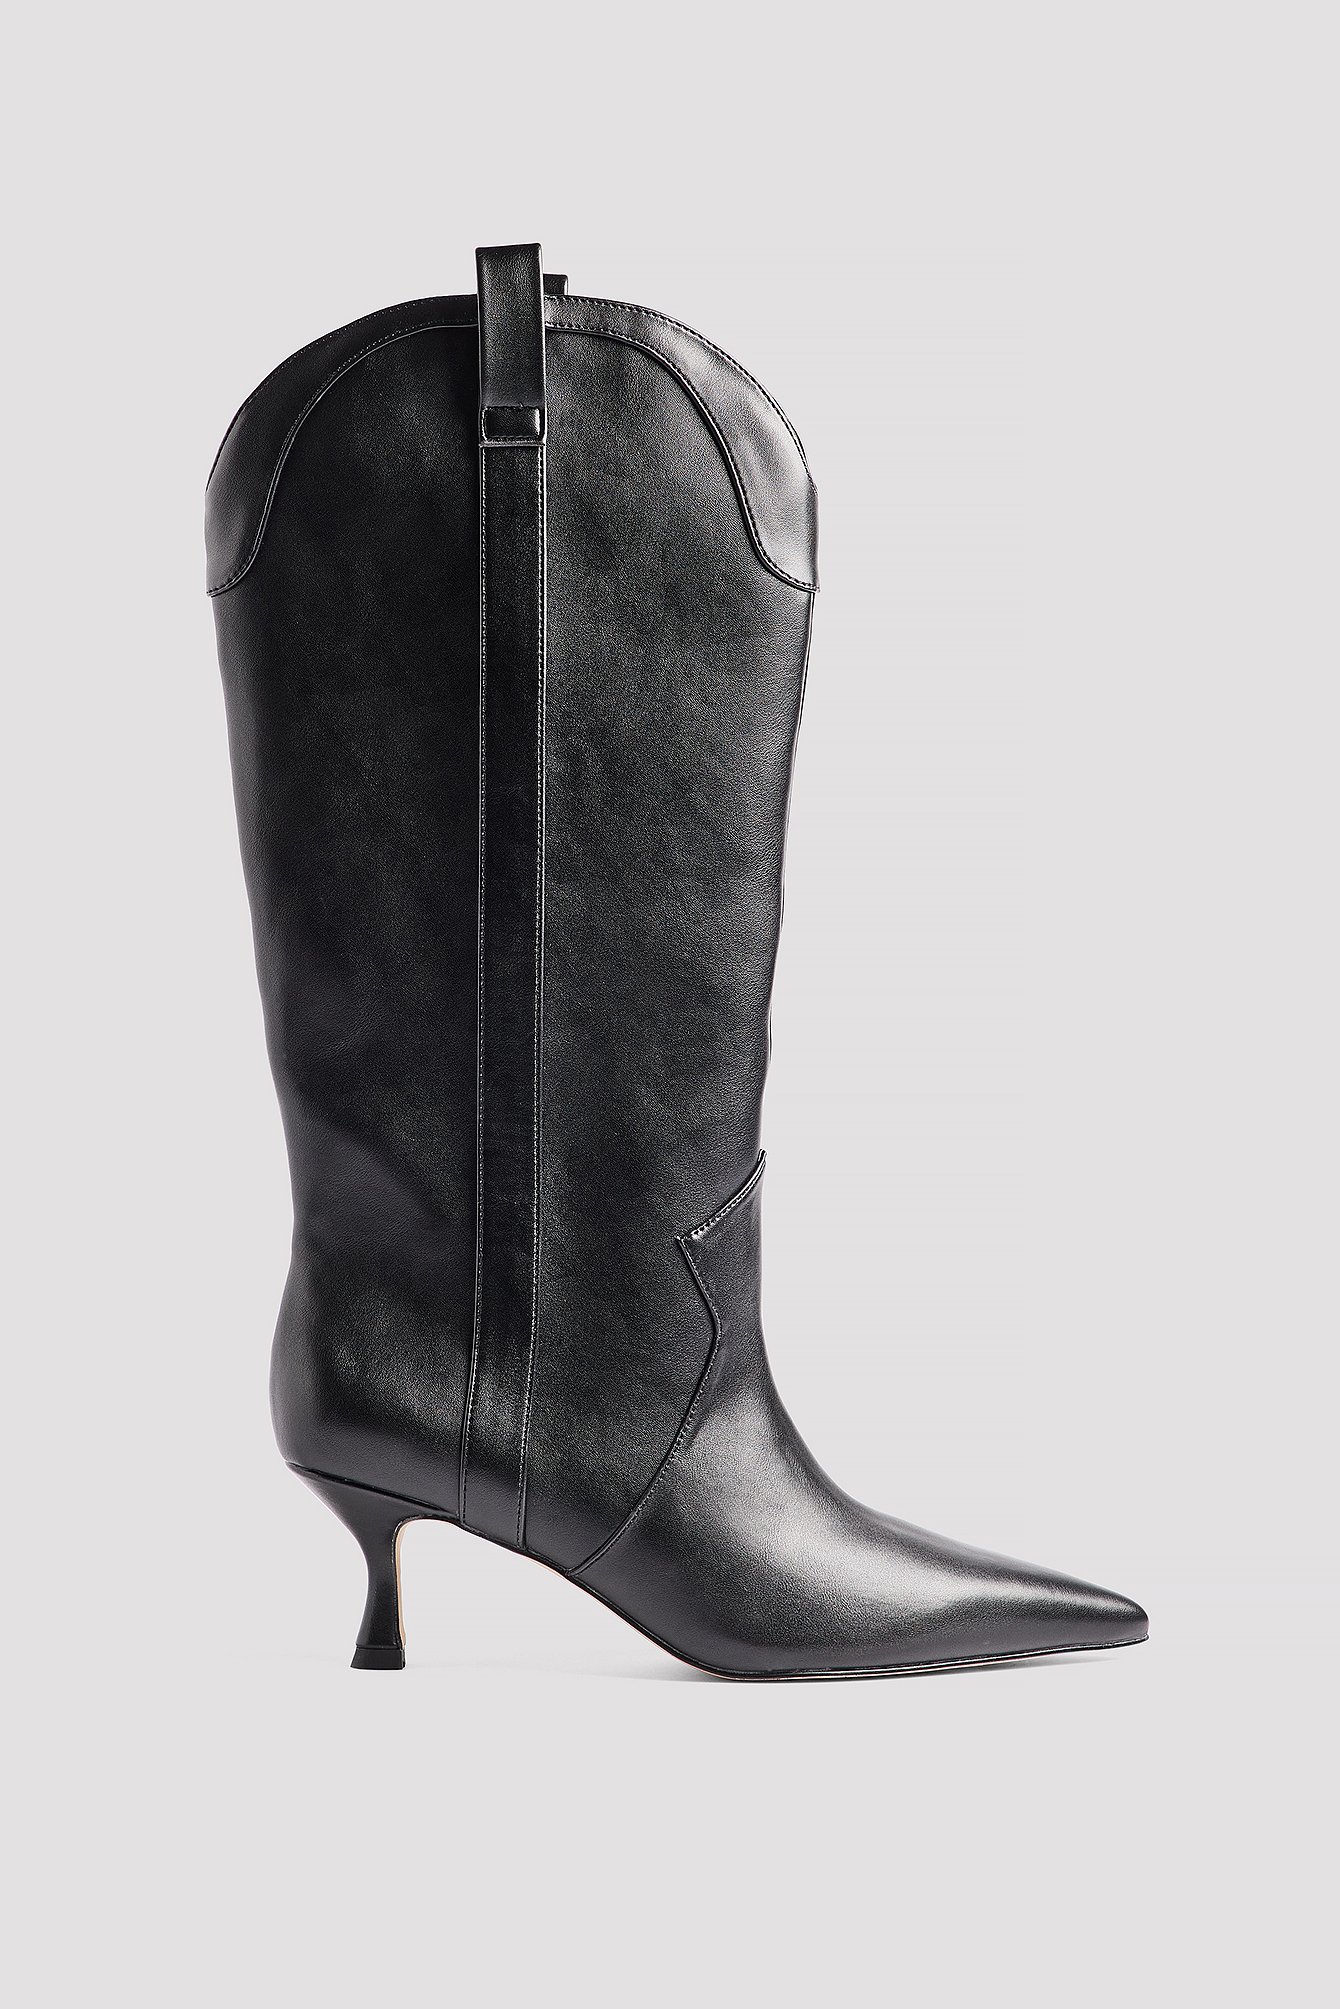 Womens Knee High boots | Find the perfect boots at NA-KD | NA-KD